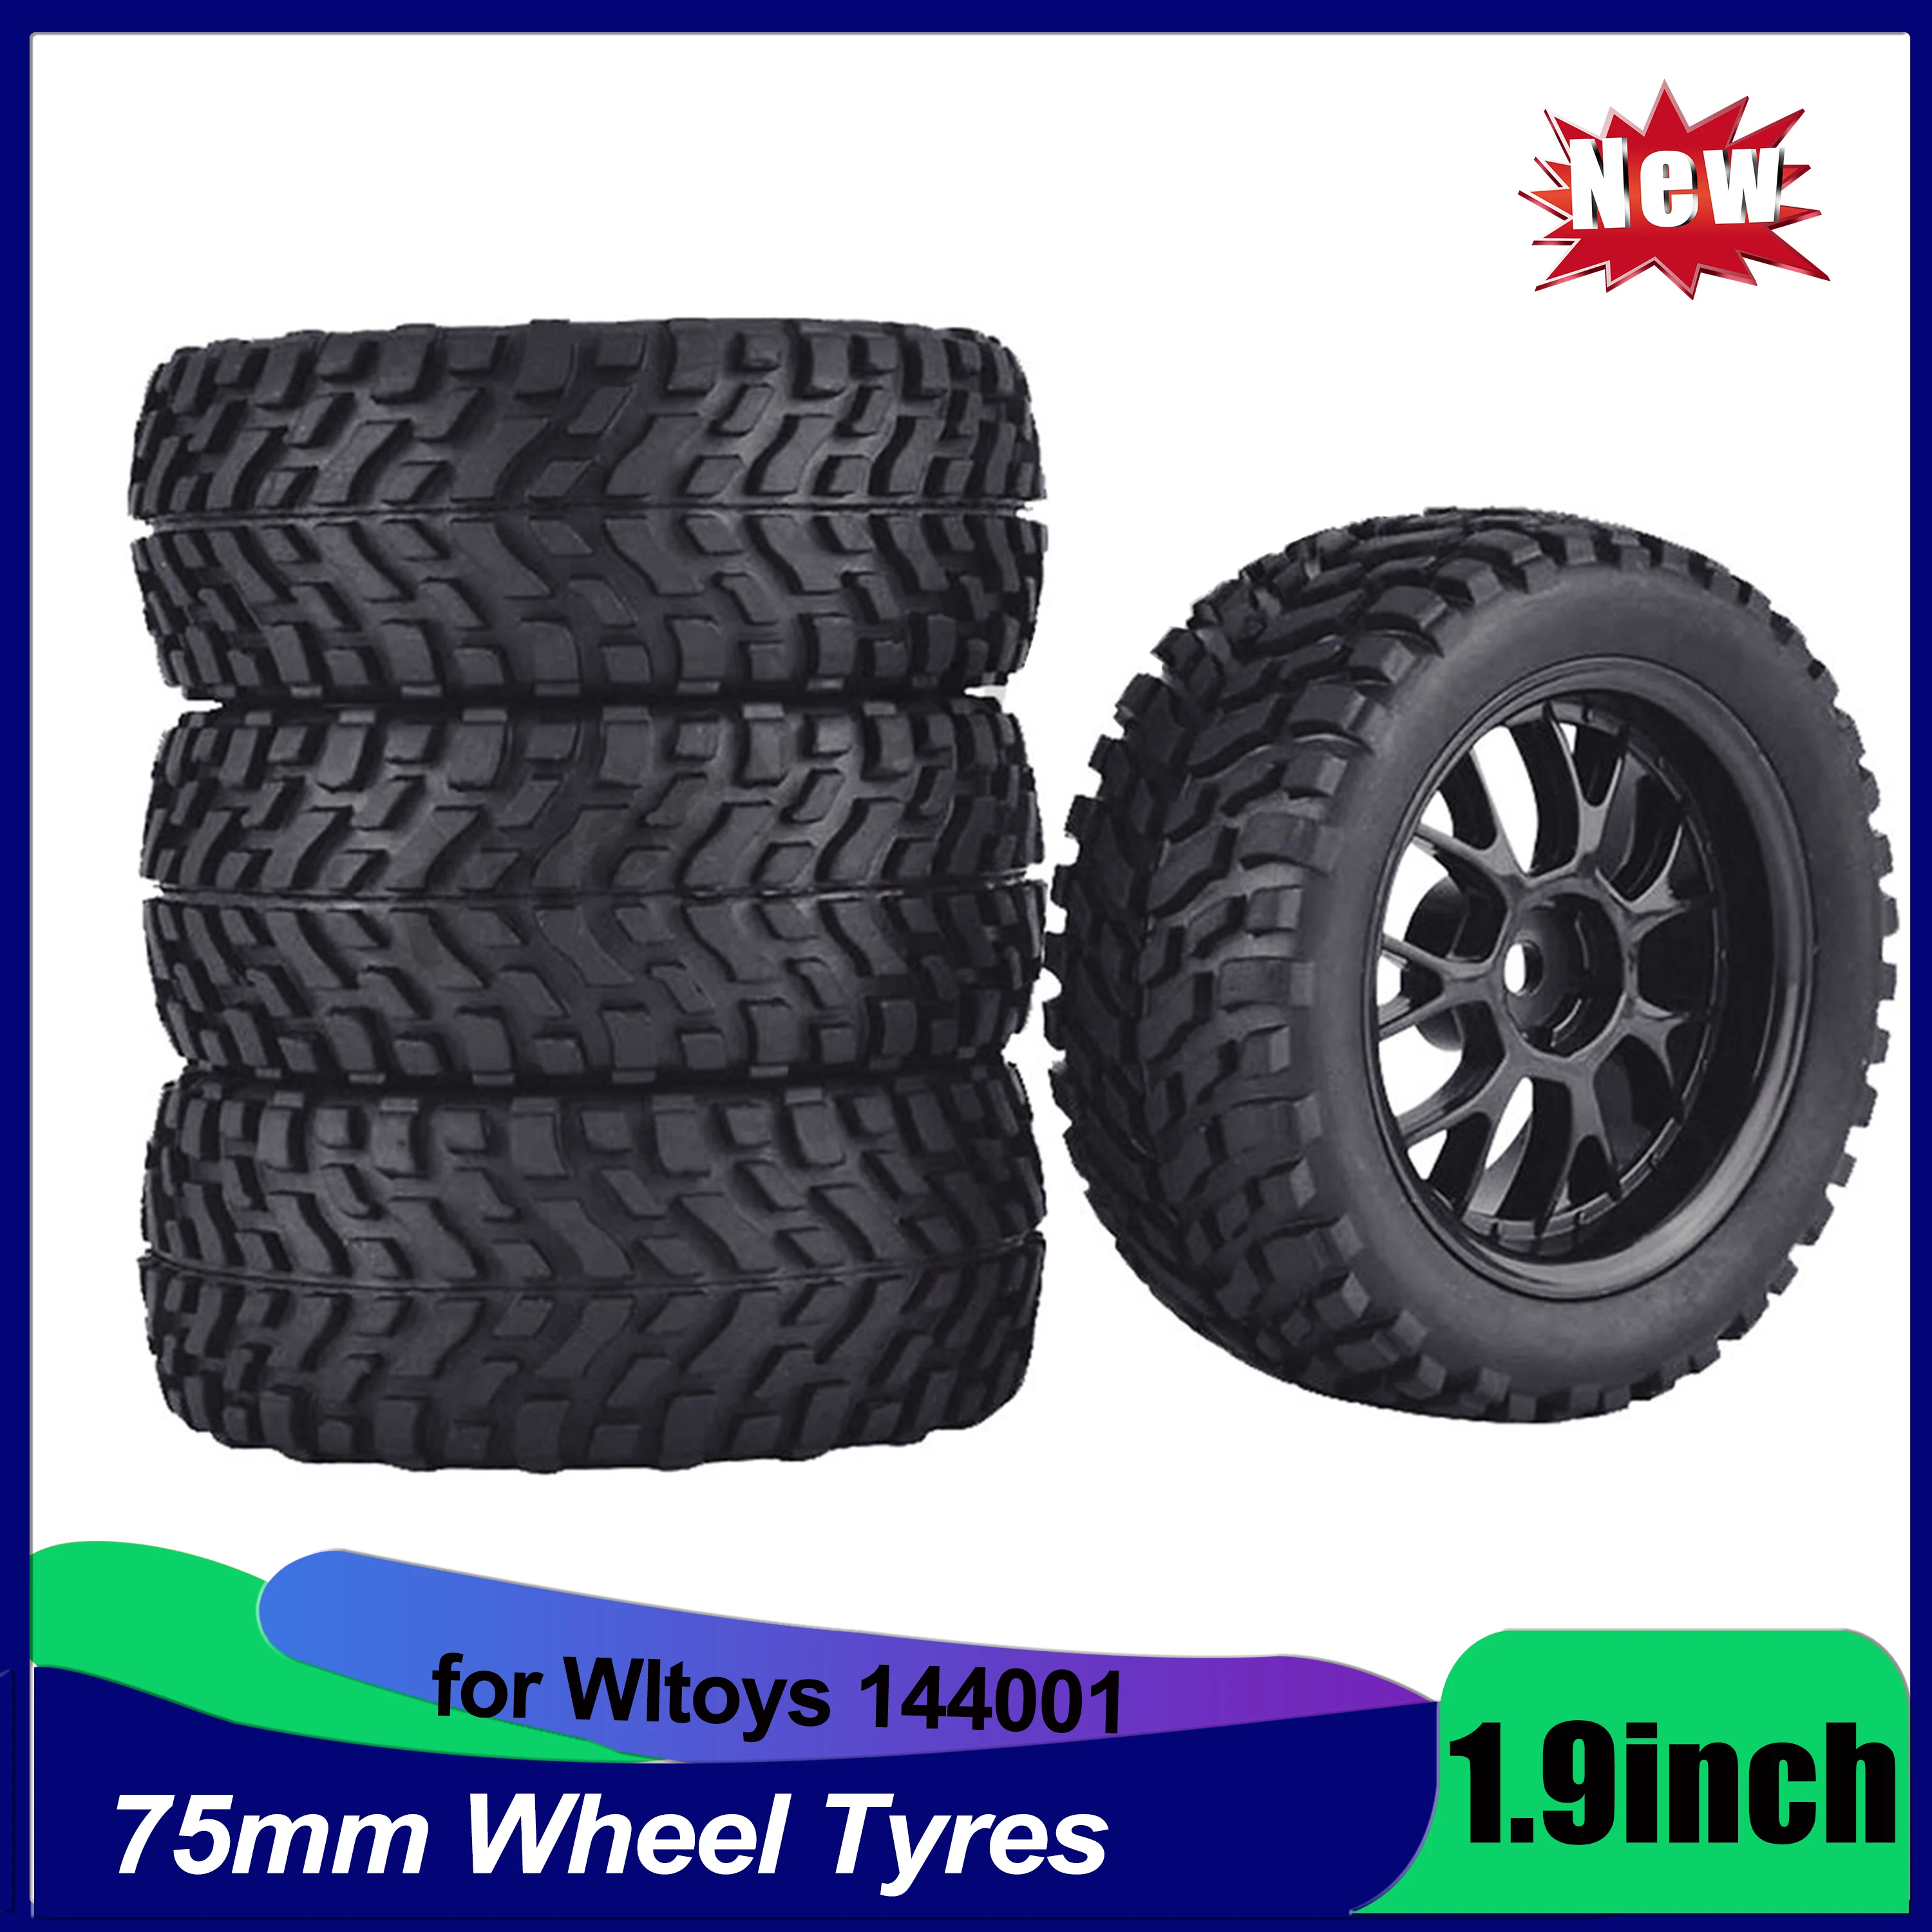 

1.9 inch 75mm Off Road Buggy Tires Wheel 12mm Hex Hubs for Wltoys 144001 1/14 1/16 1/10 Scx10 Traxxas Trx-4 Tamiya RC Racing Car